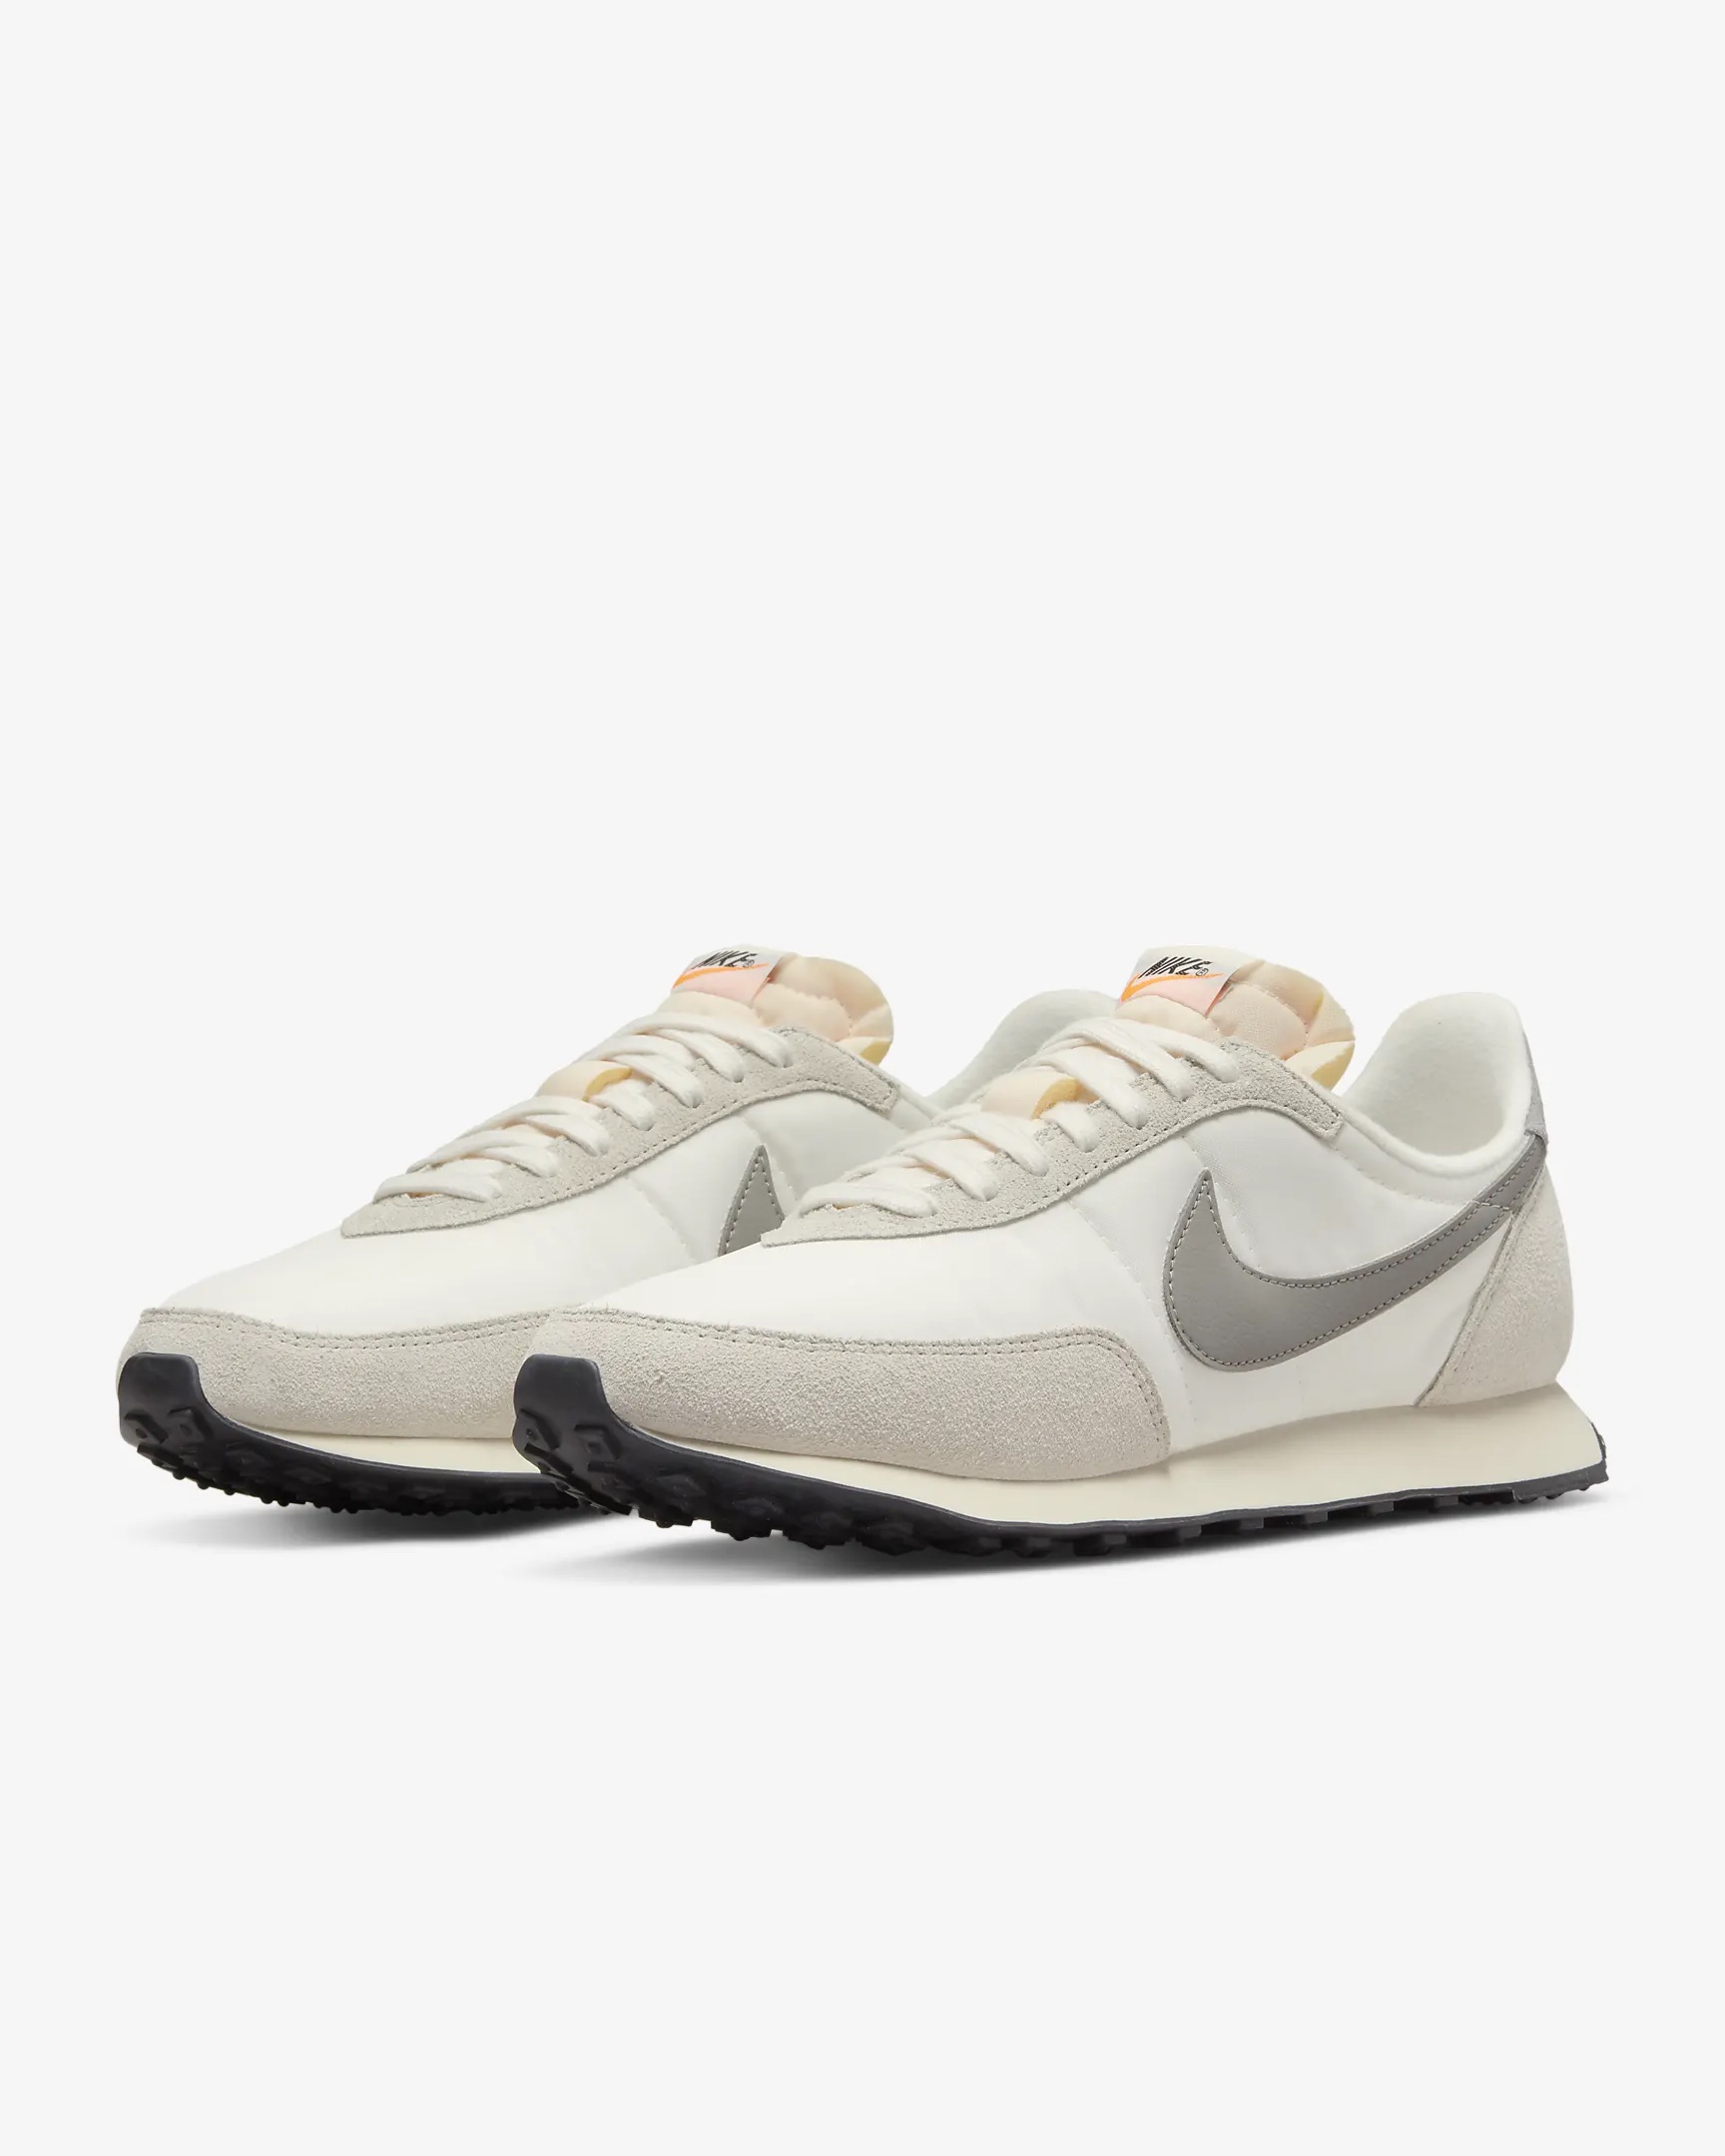 Deal Alert: You Can Now Buy Nike Waffle Trainer 2 SE Men's Shoes For ...